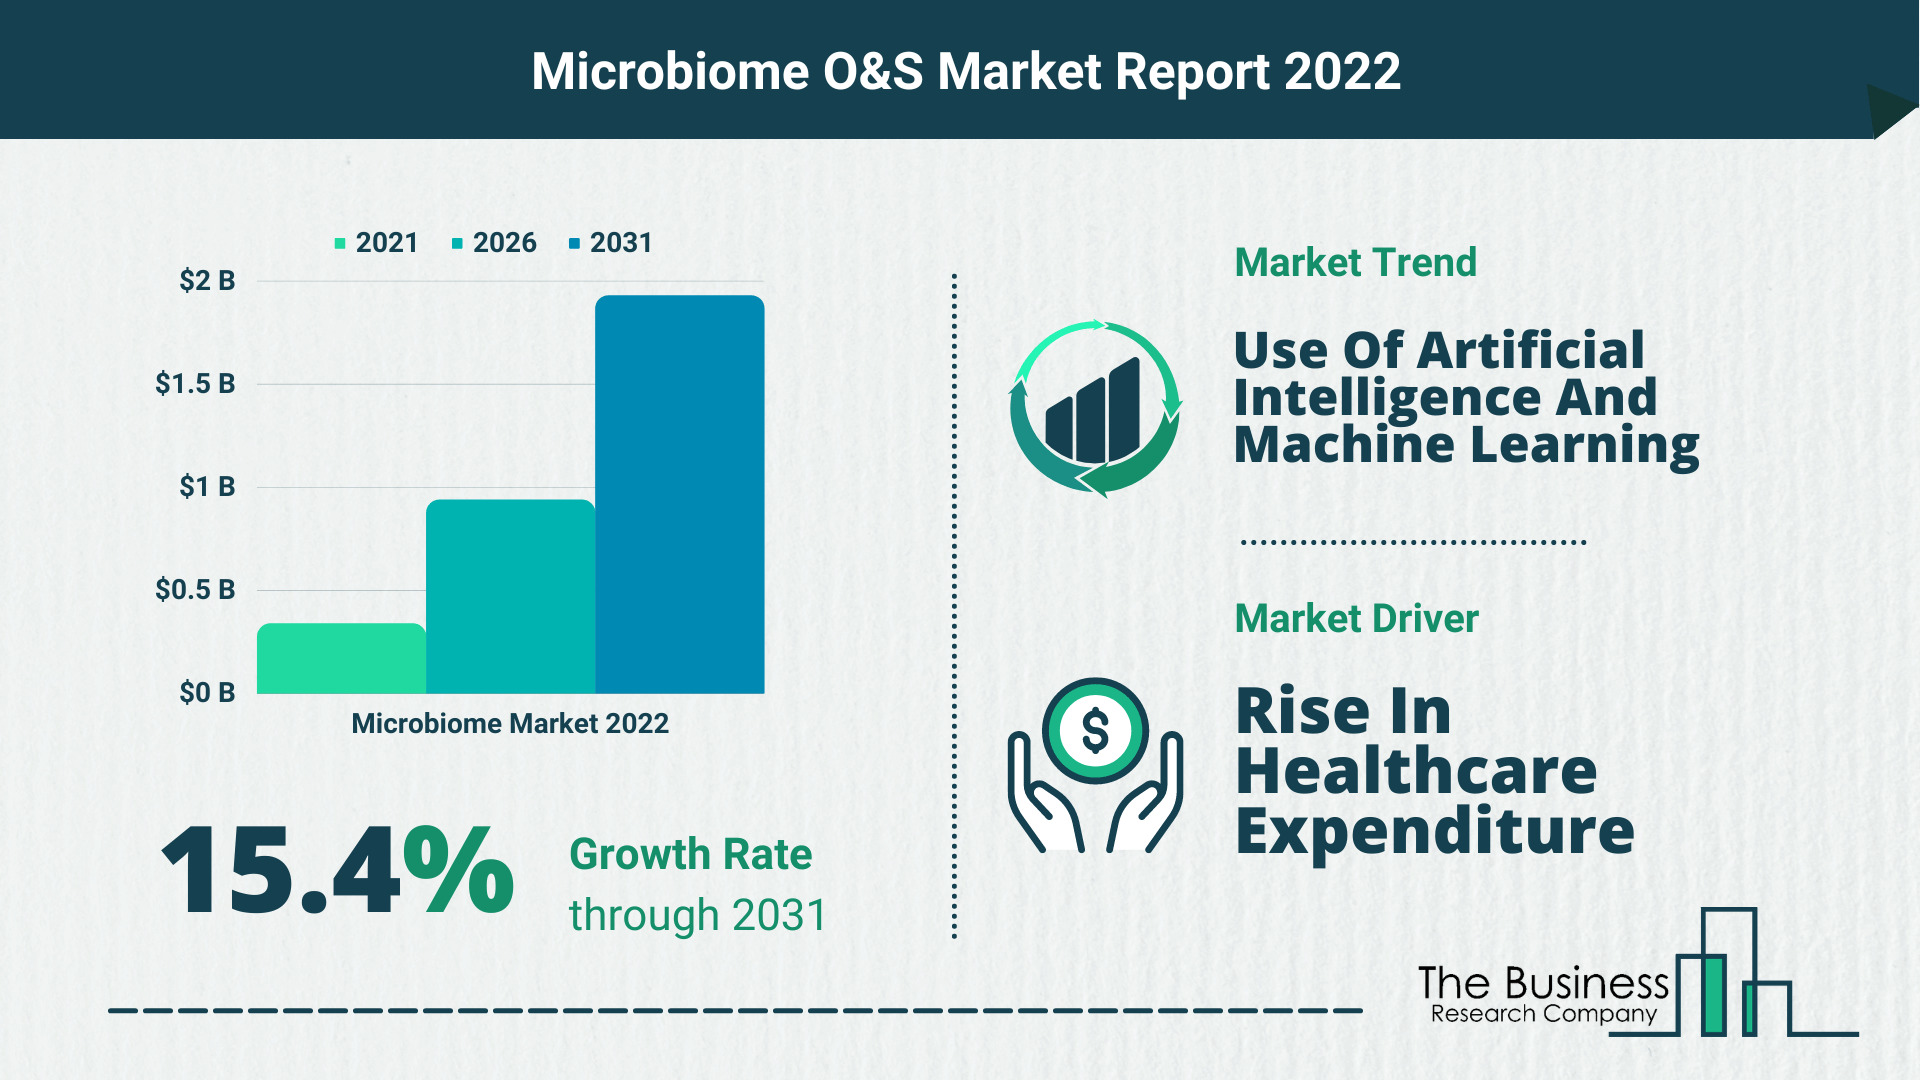 The Microbiome Market Forecast Until 2030 – Opportunities And Strategies